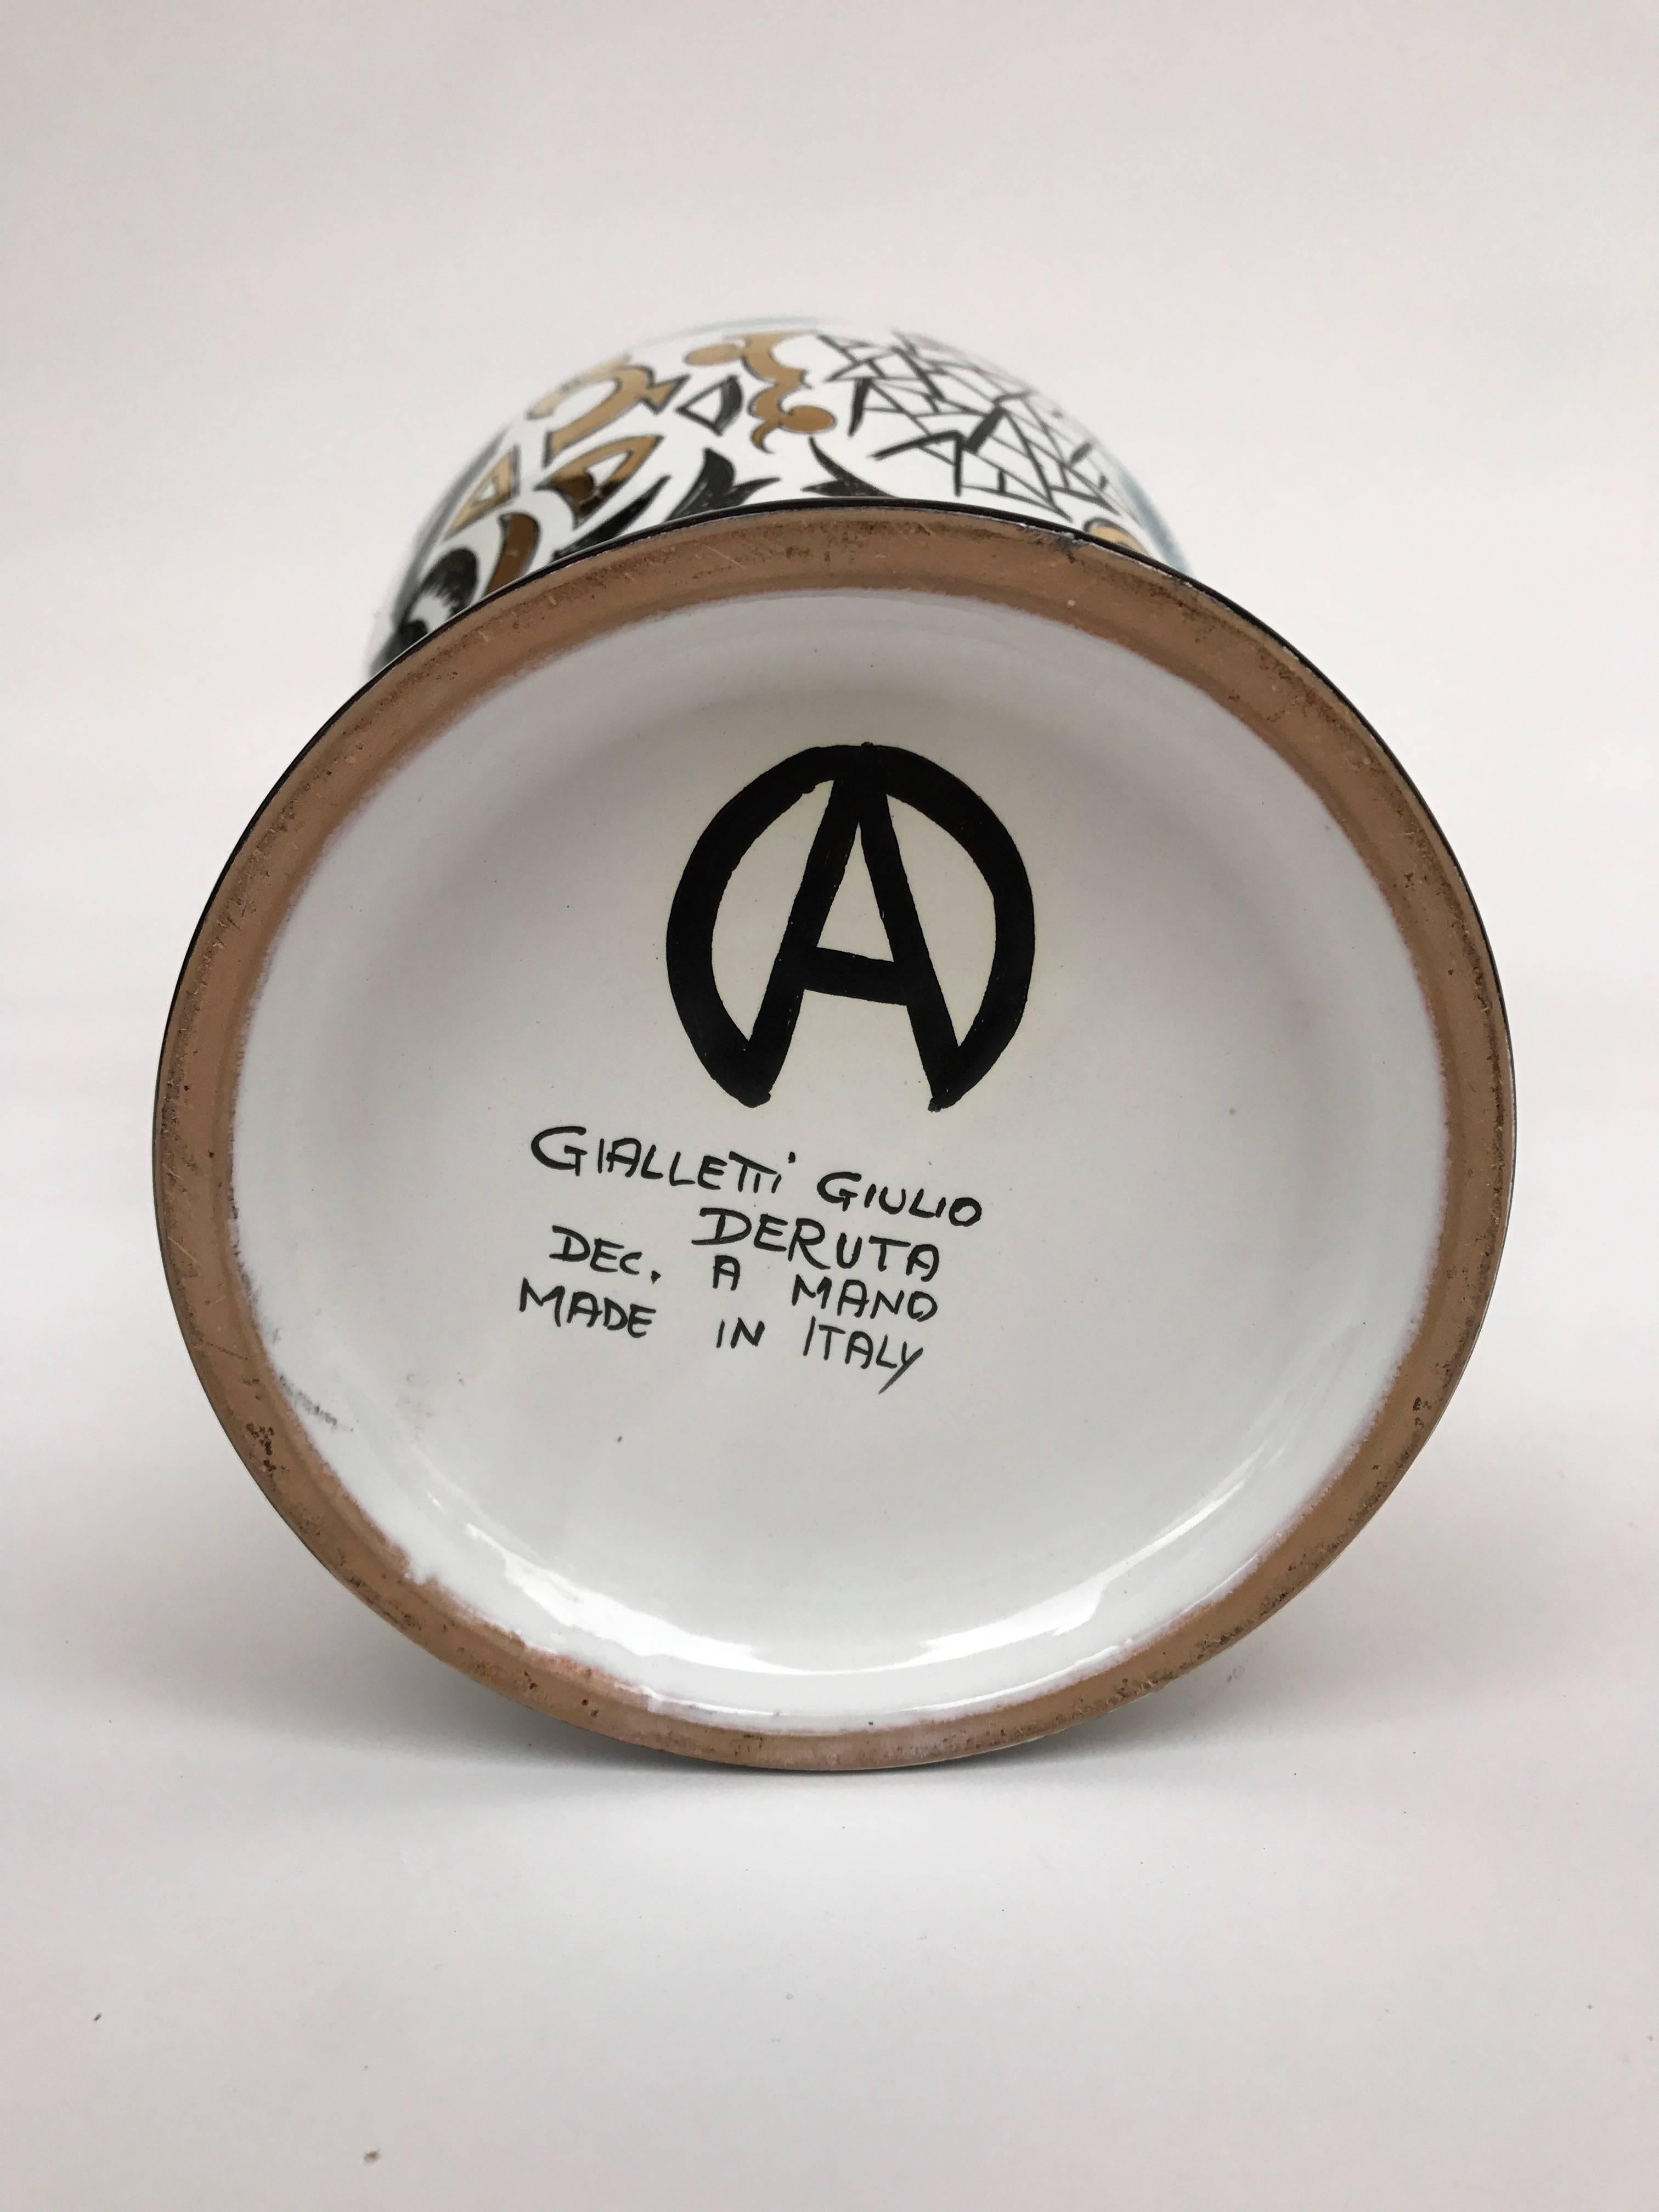 Hand drawing contemporary ceramic vase by the artist Antonio Cagianelli for the ceramist Giulio Gialletti in Deruta Italy. Antonio Cagianelli work on the Vanité for more than 20 years. Fine work on the Vanité symbol, Skull, bird feather, tribal